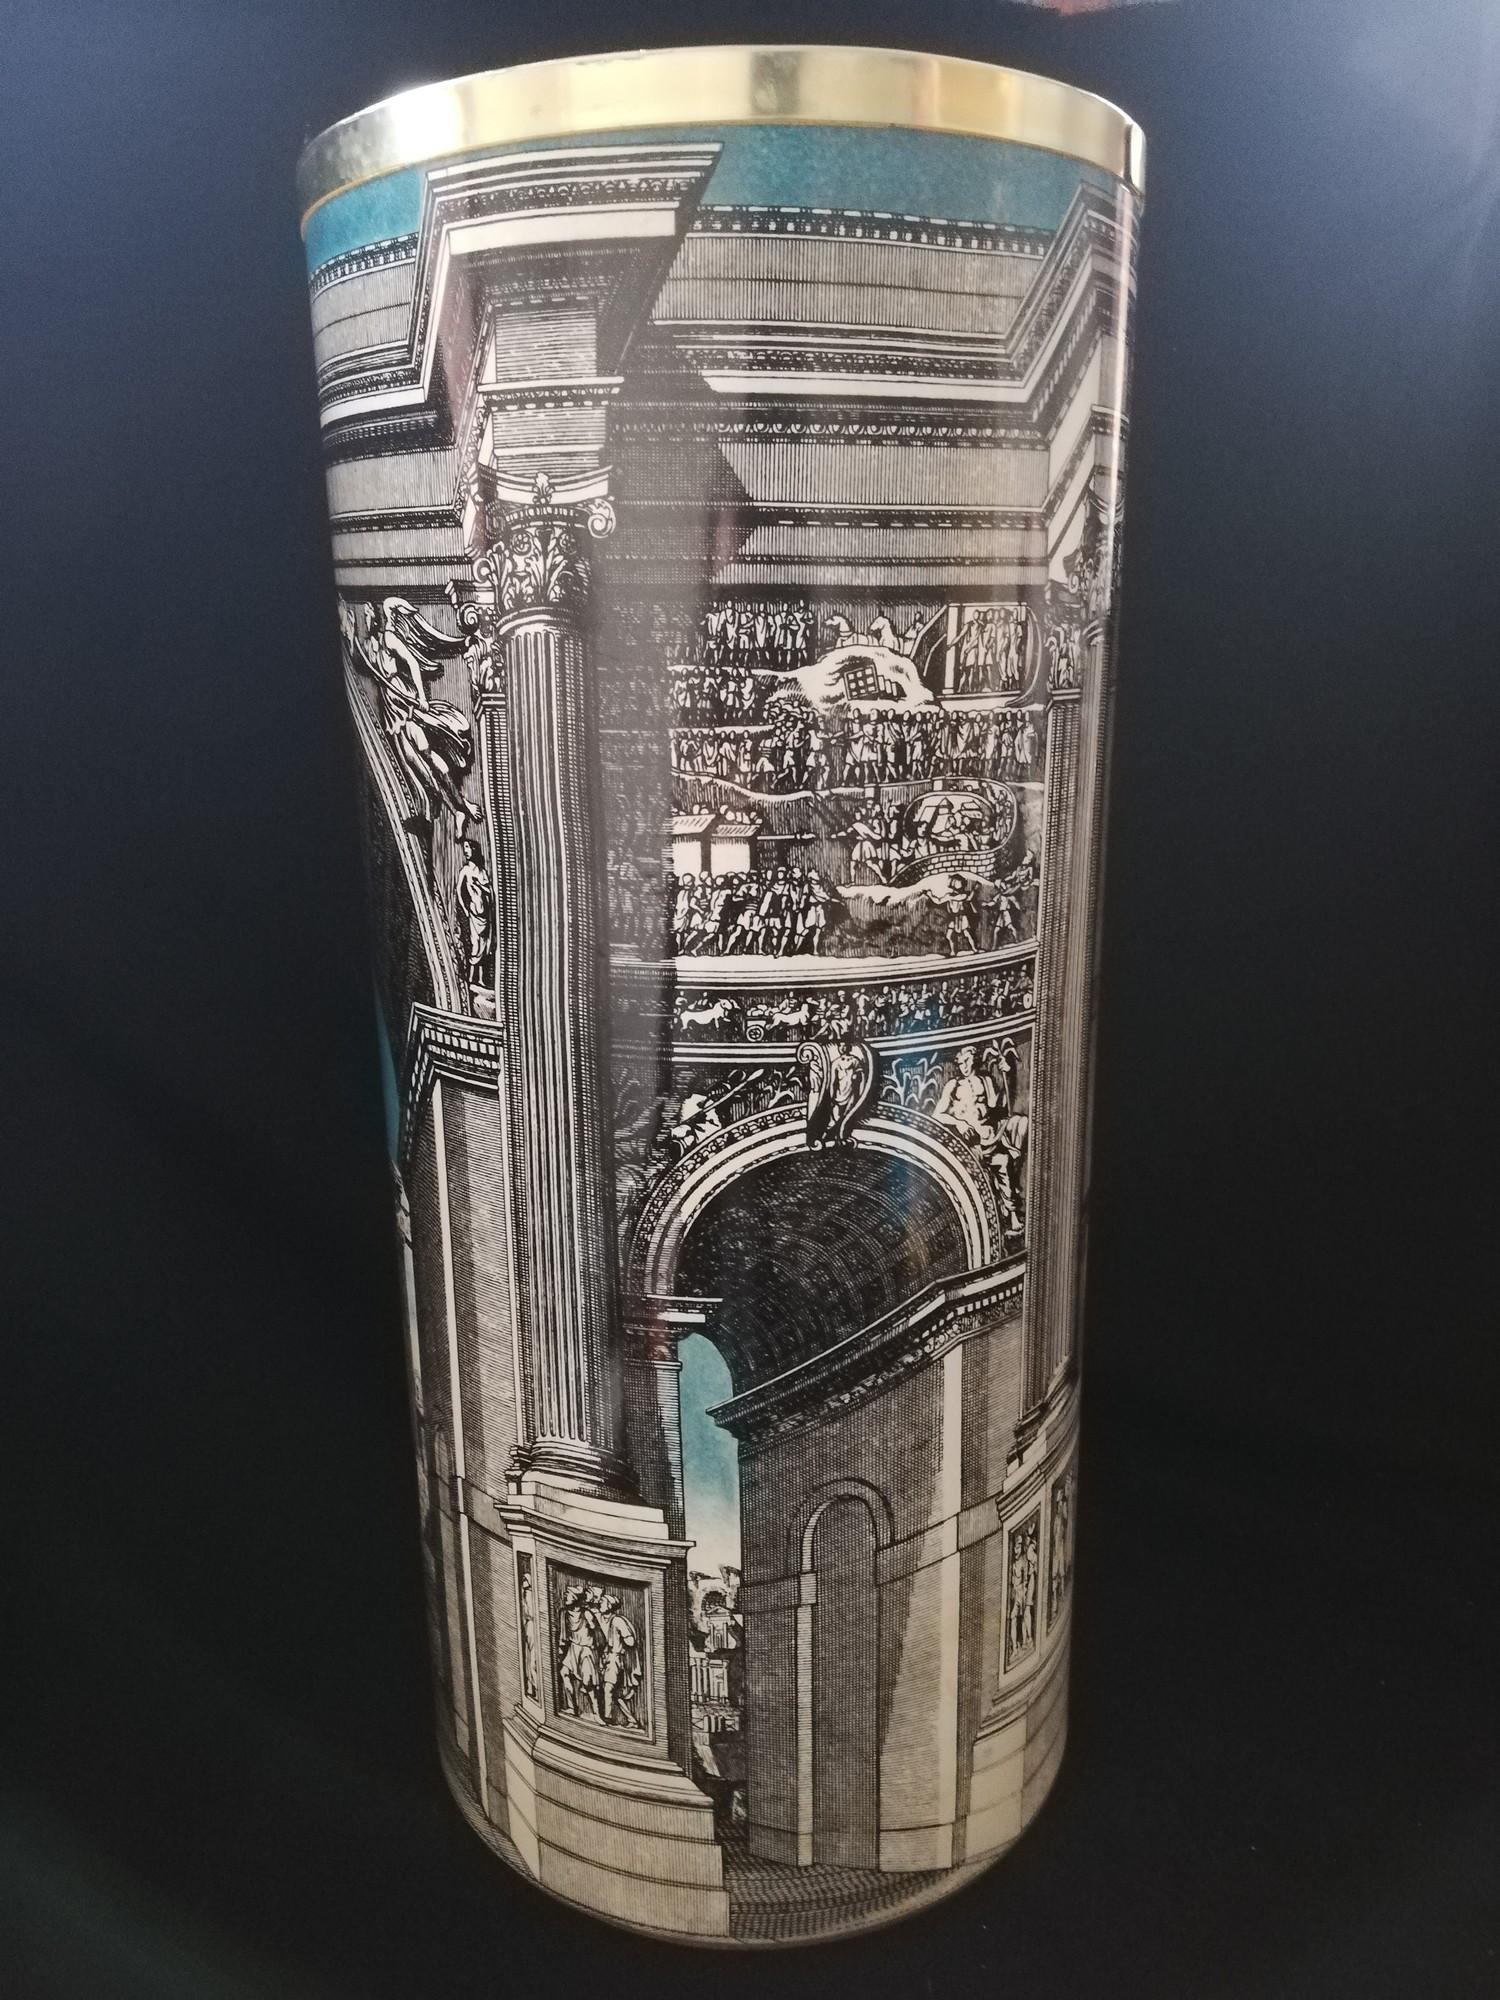 Fornasetti (unmarked) 'Arco Romano' umbrella stand of classical architecture design -height 22½" - Image 3 of 6